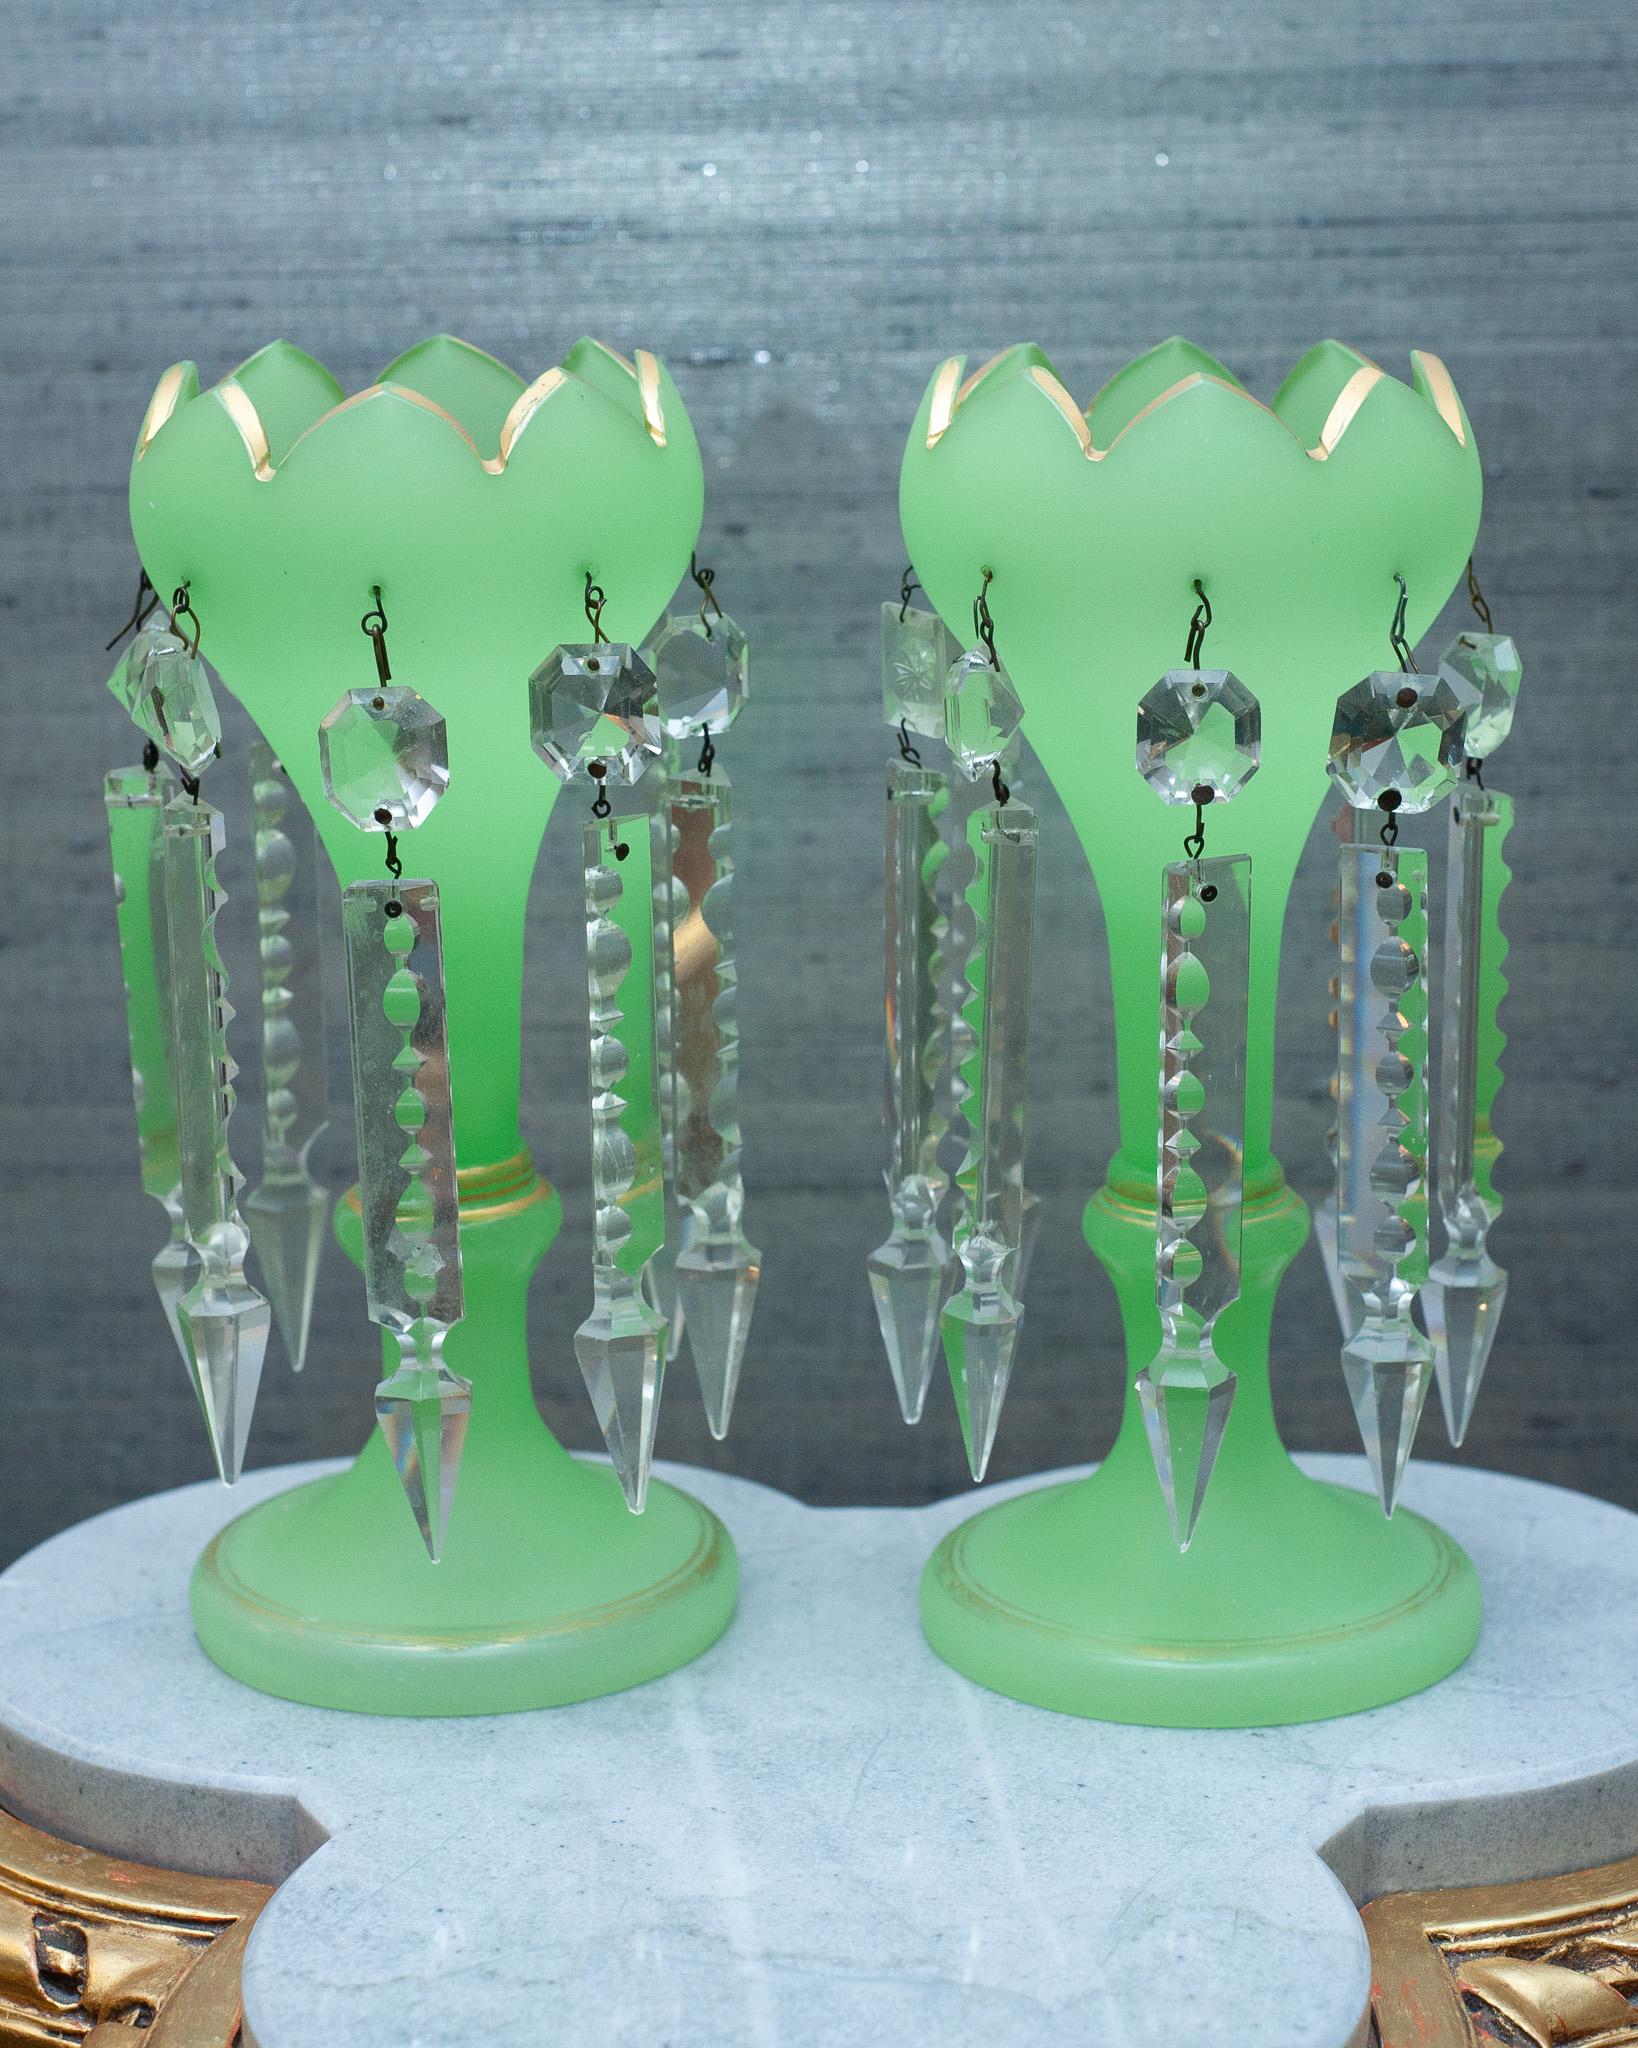 A stunning pair of Antique French opaline glass mantle lusters, in green opaline glass with gilding and scalloped edge, and cut crystal prisms. Each luster has 8 hanging prisms.